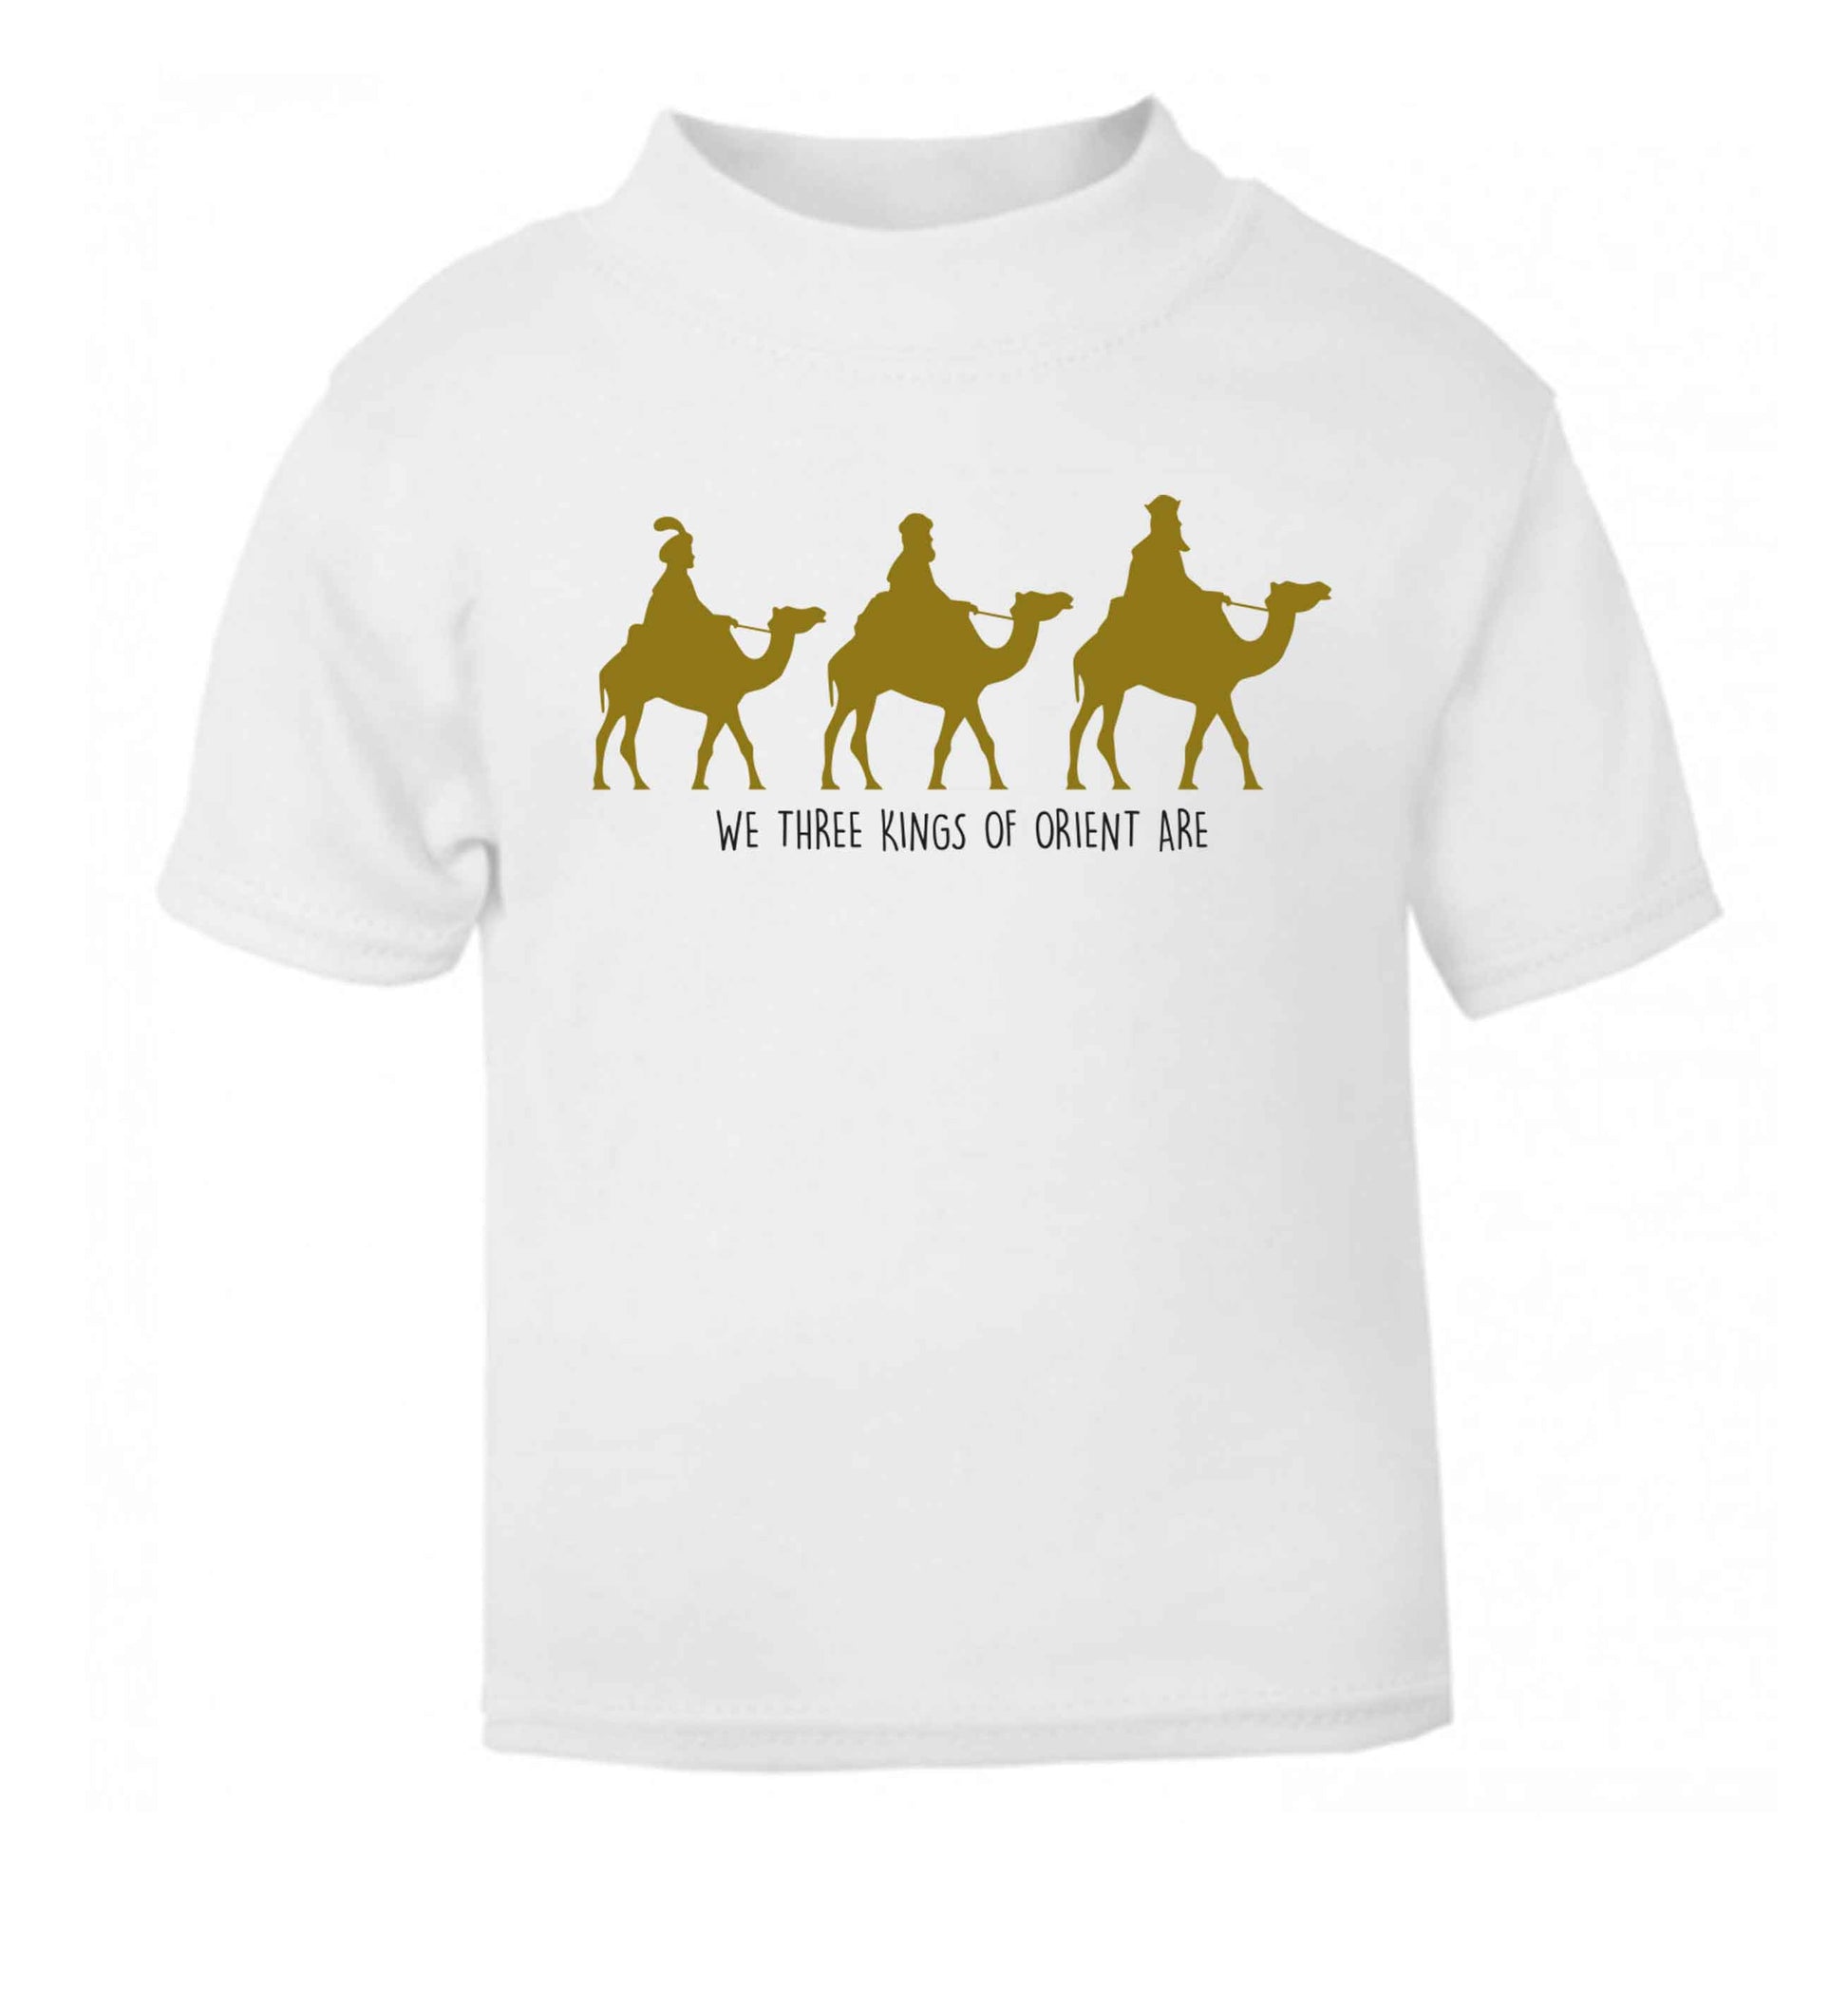 We three kings of orient are white baby toddler Tshirt 2 Years